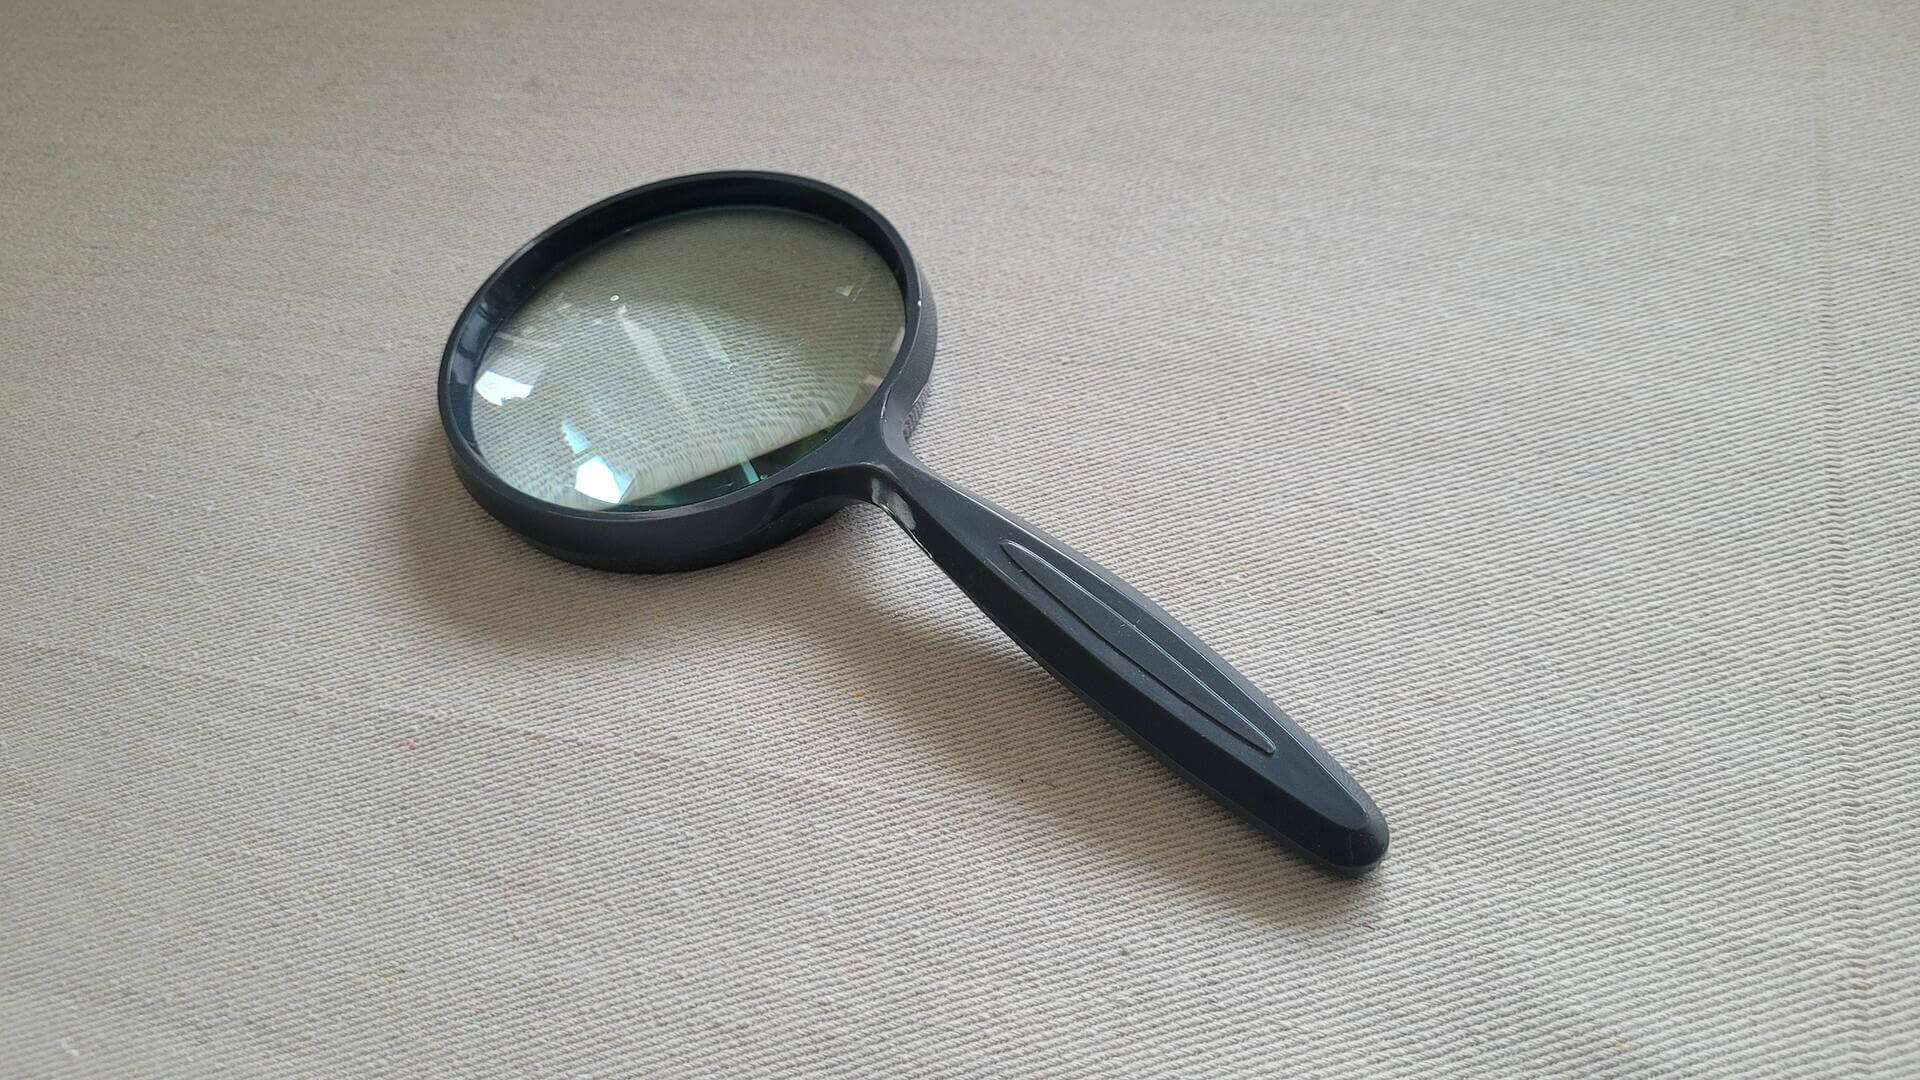 Reading magnifying glass with ergonomic curved handle, 3 inch lens, and original box. Vintage well designed and sturdy optical magnifier tool